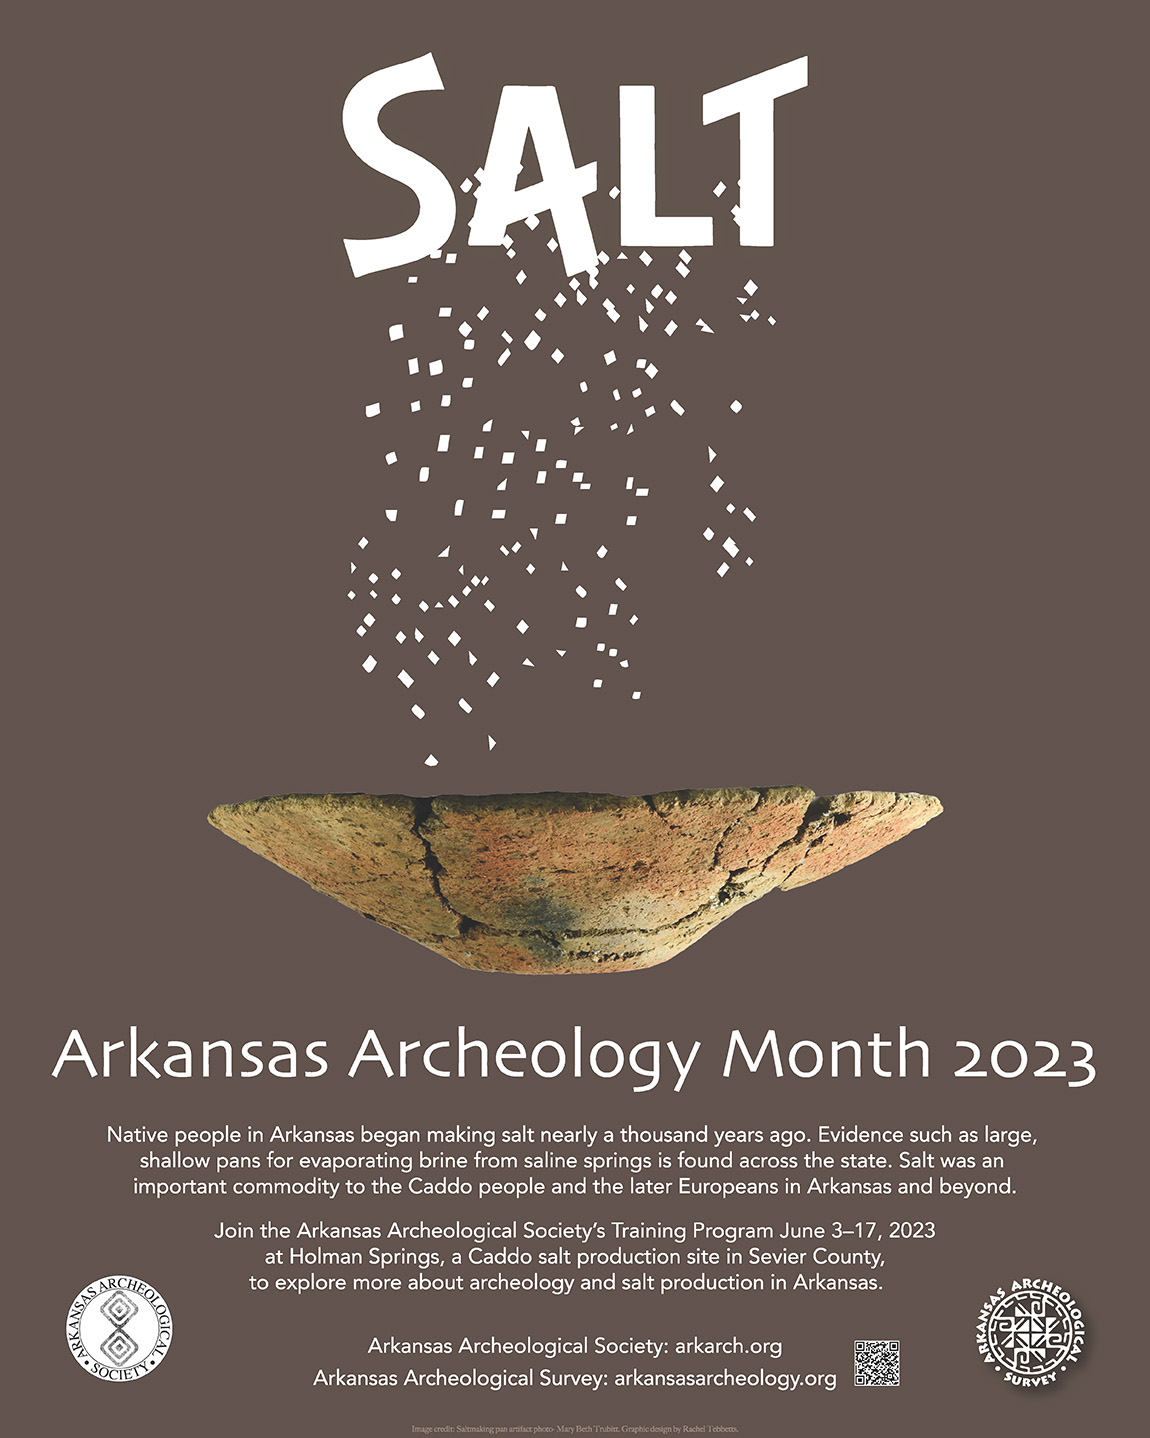 Graphic of a shallow clay pan with white flakes falling into it from the word SALT, set against a dark brown background. Click or tap image to download a printable PDF file of the poster.